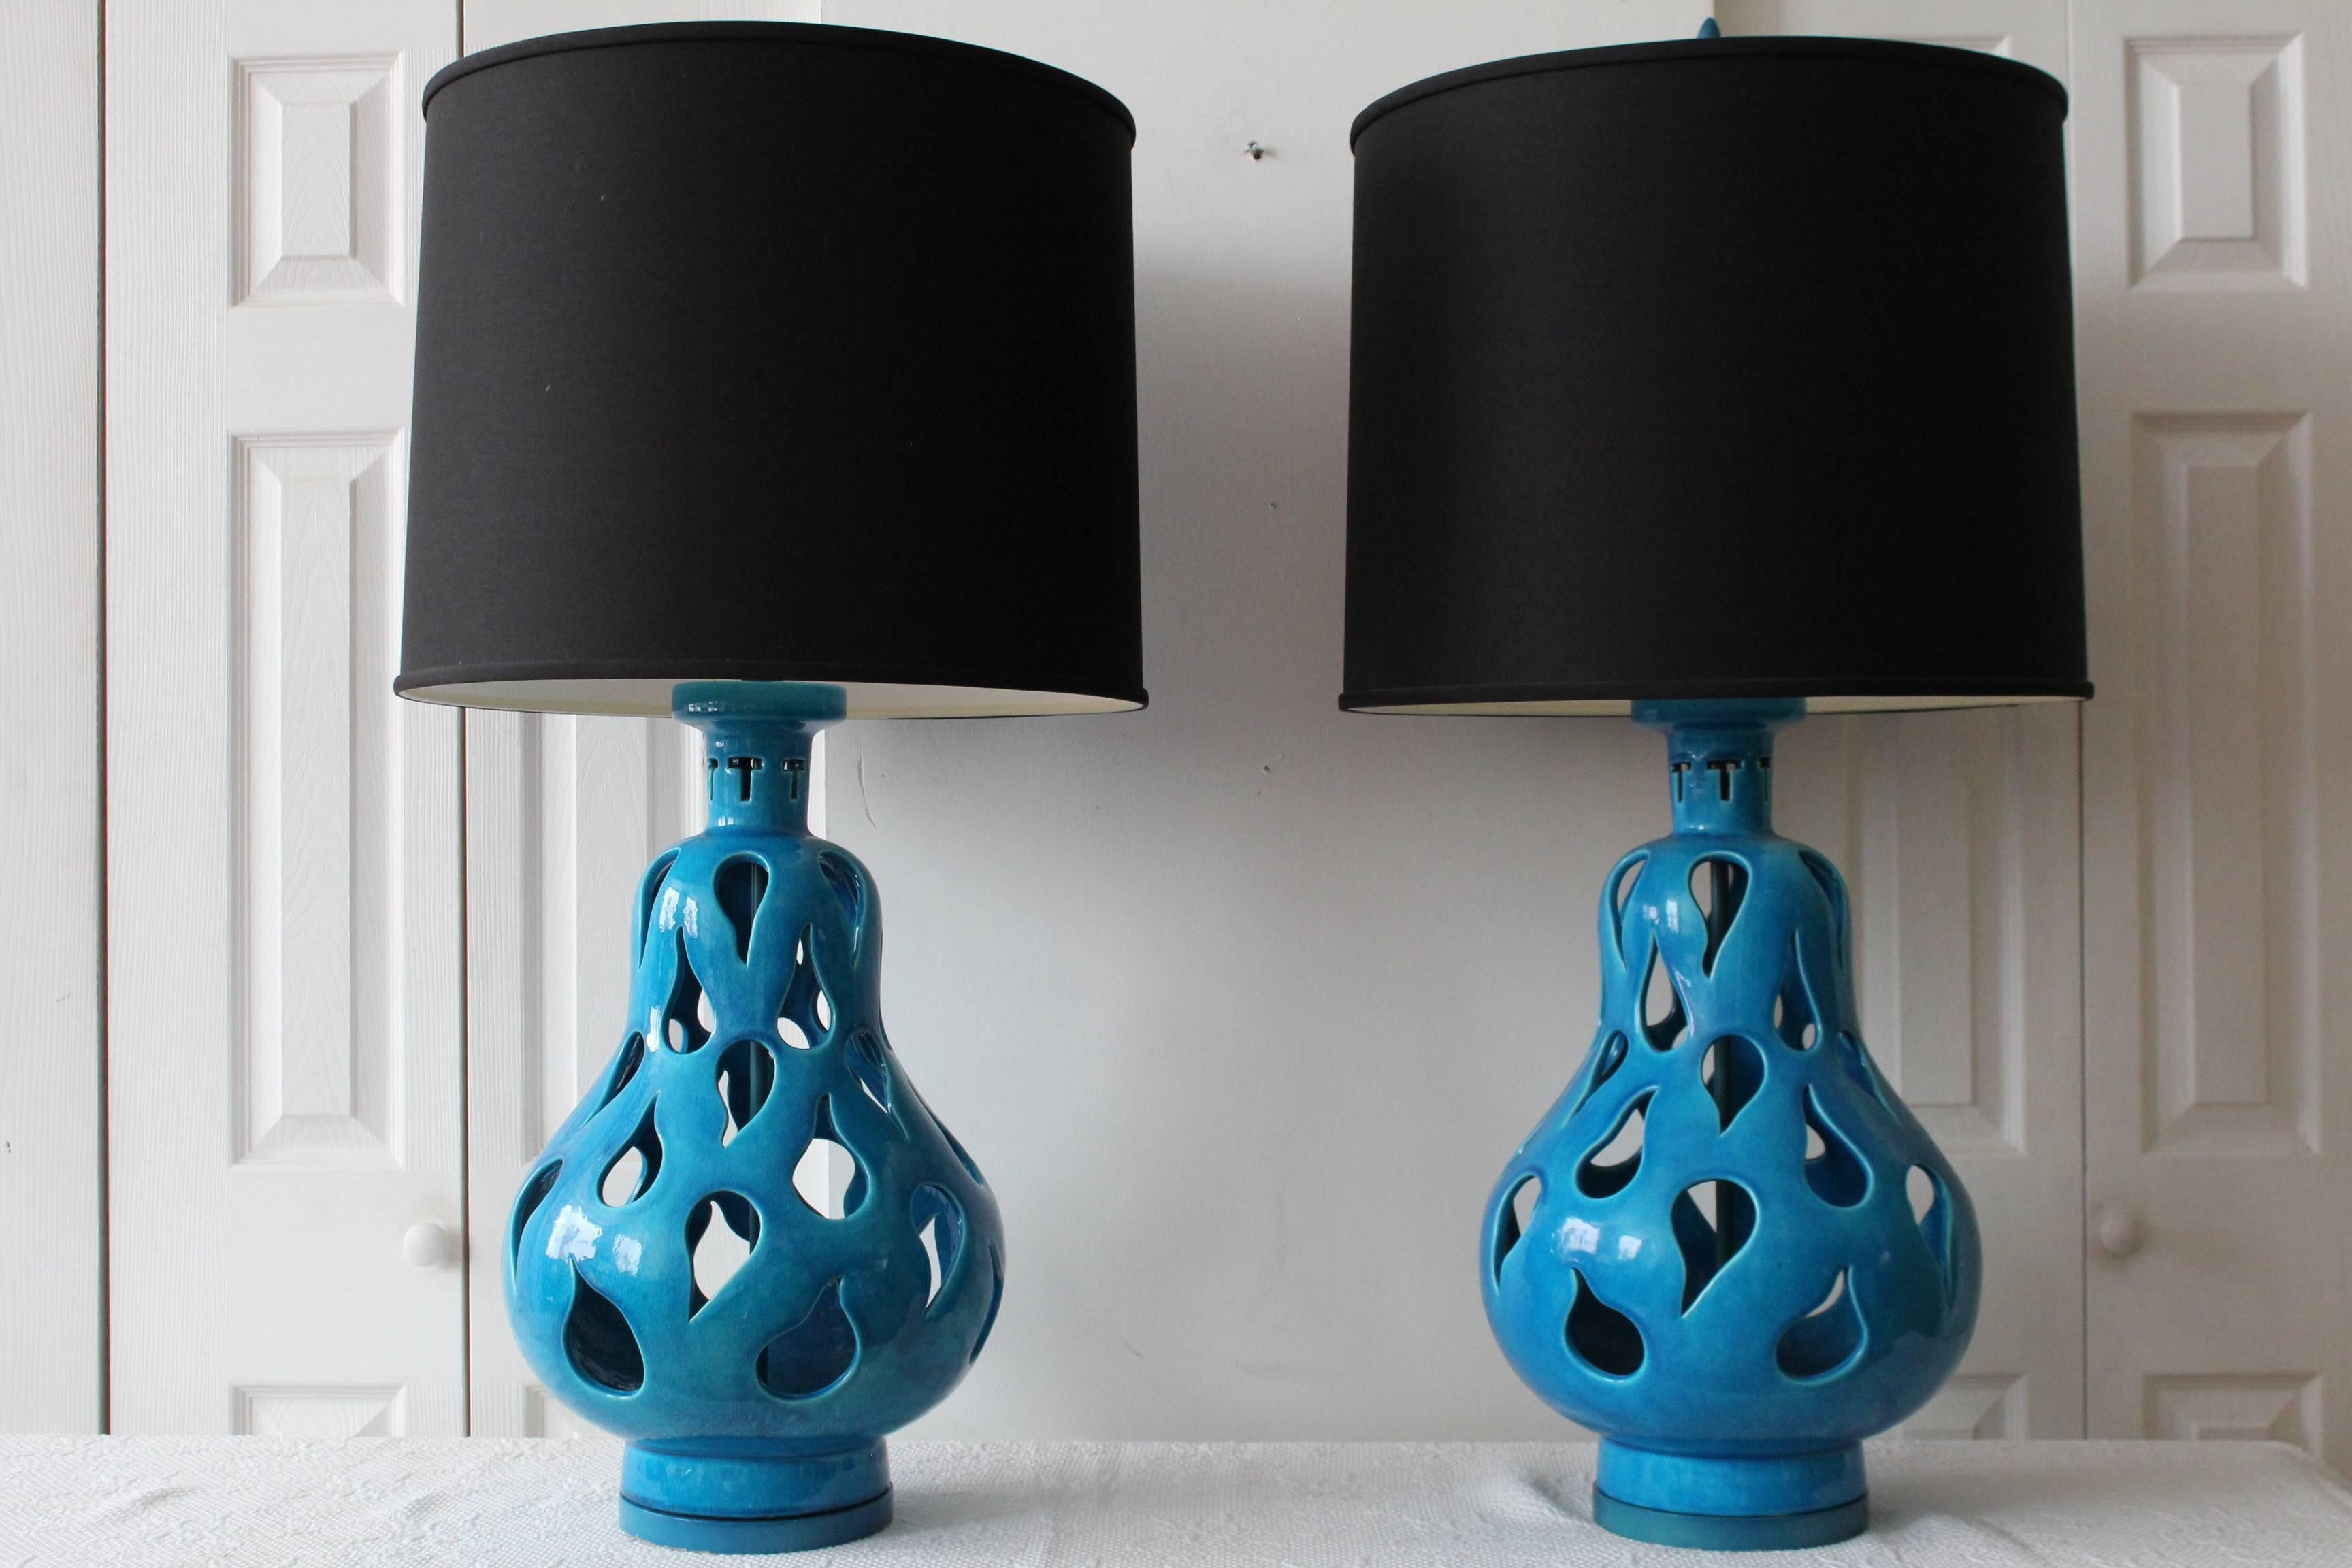 Mid-20th Century Hermes Blue Paisley Cut-Out Italian Table Lamps